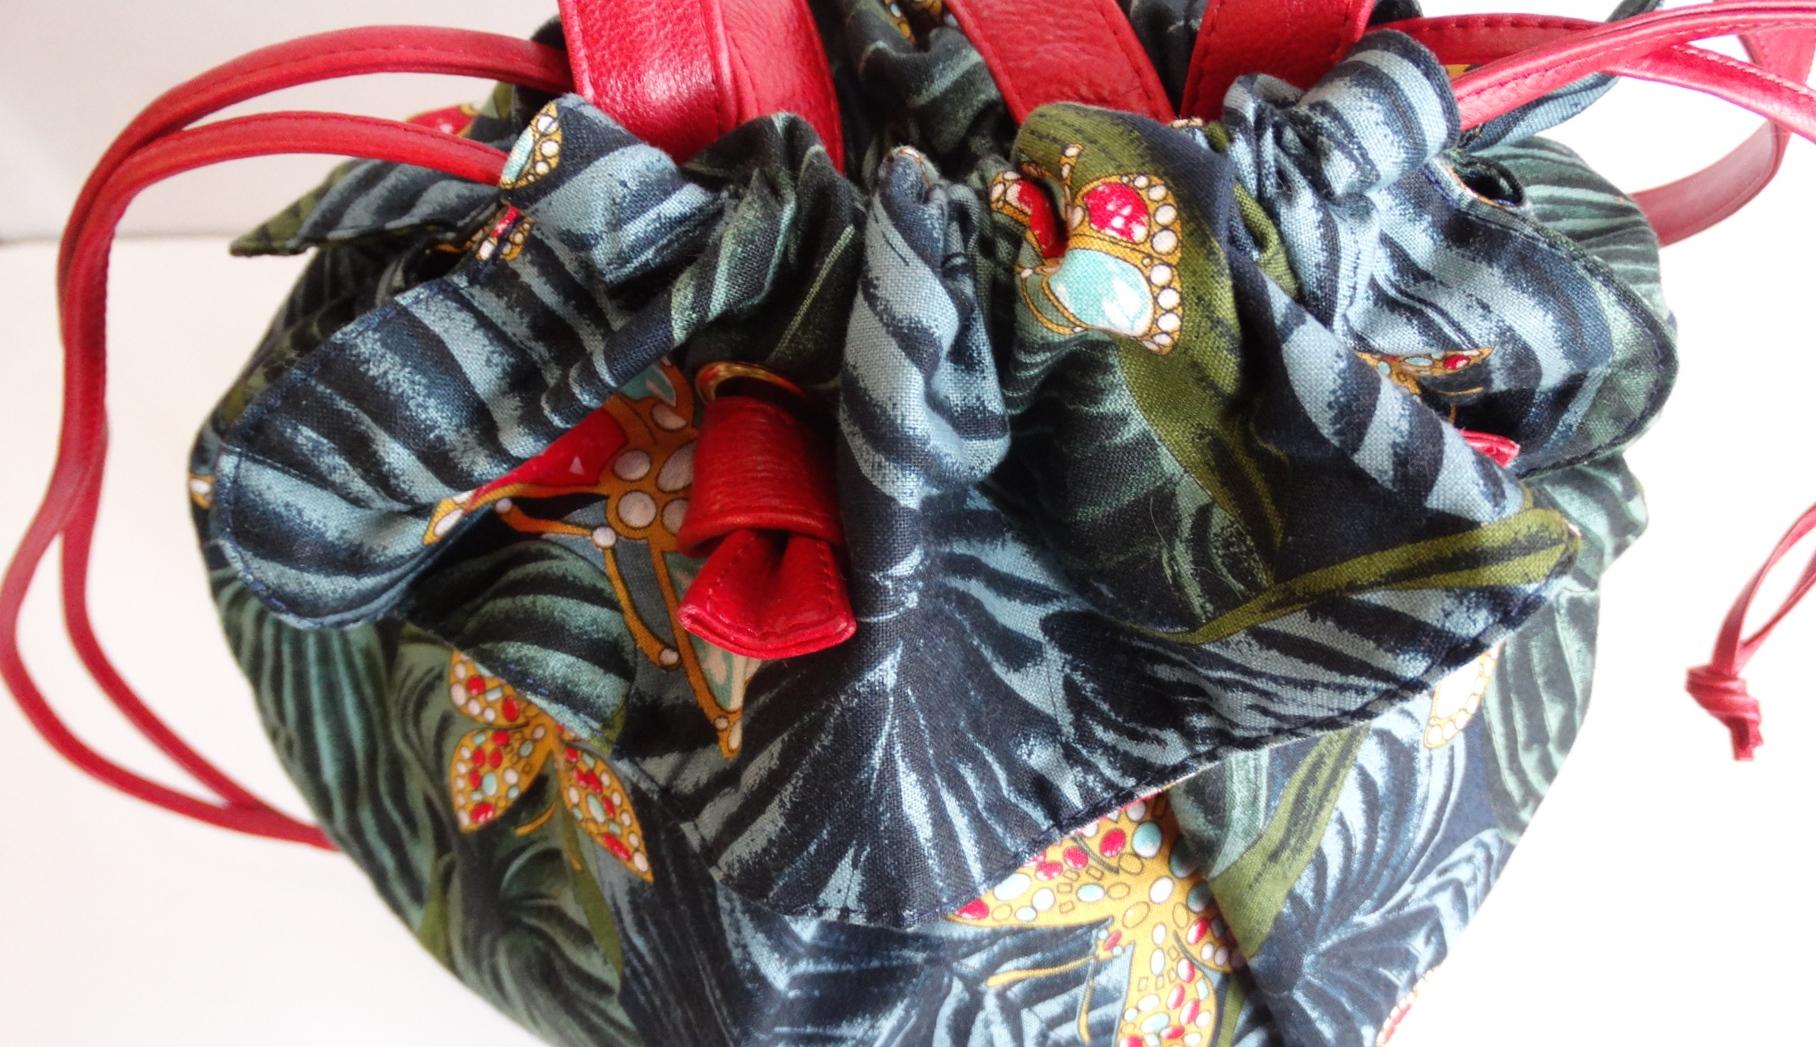 Always Be Ready For Vacation With This Bottega Veneta Bag! Circa 1970s, this cotton bucket bag features a dark tropical greenery pattern with contrasting gold and rhinestone butterflies scattered throughout. Includes a small ruffle detail around the